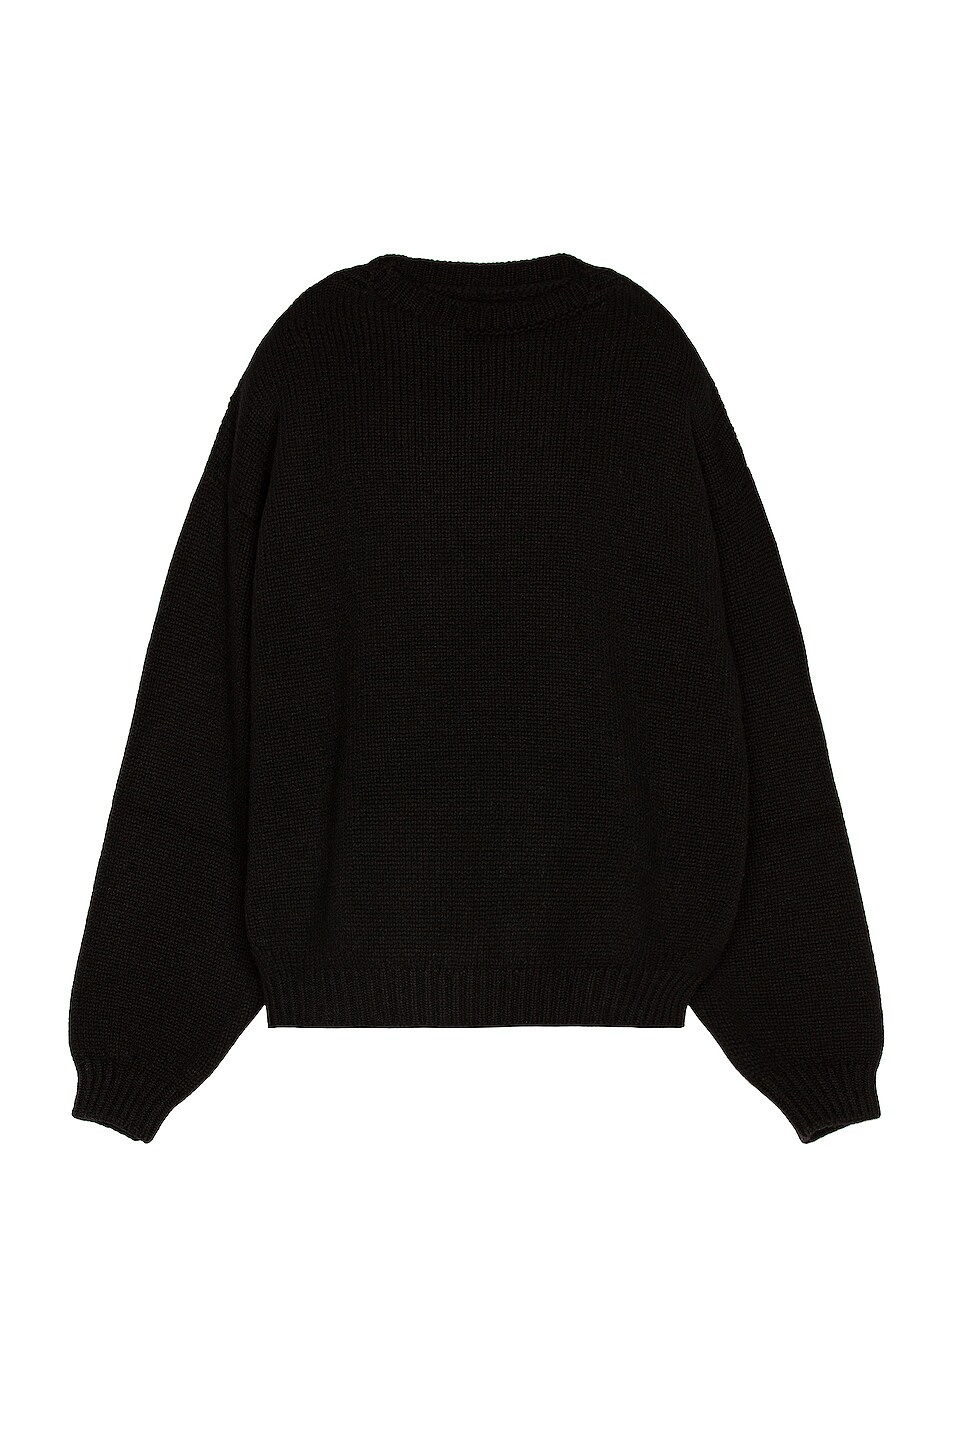 Image 1 of Fear of God Overlapped Sweater in Black